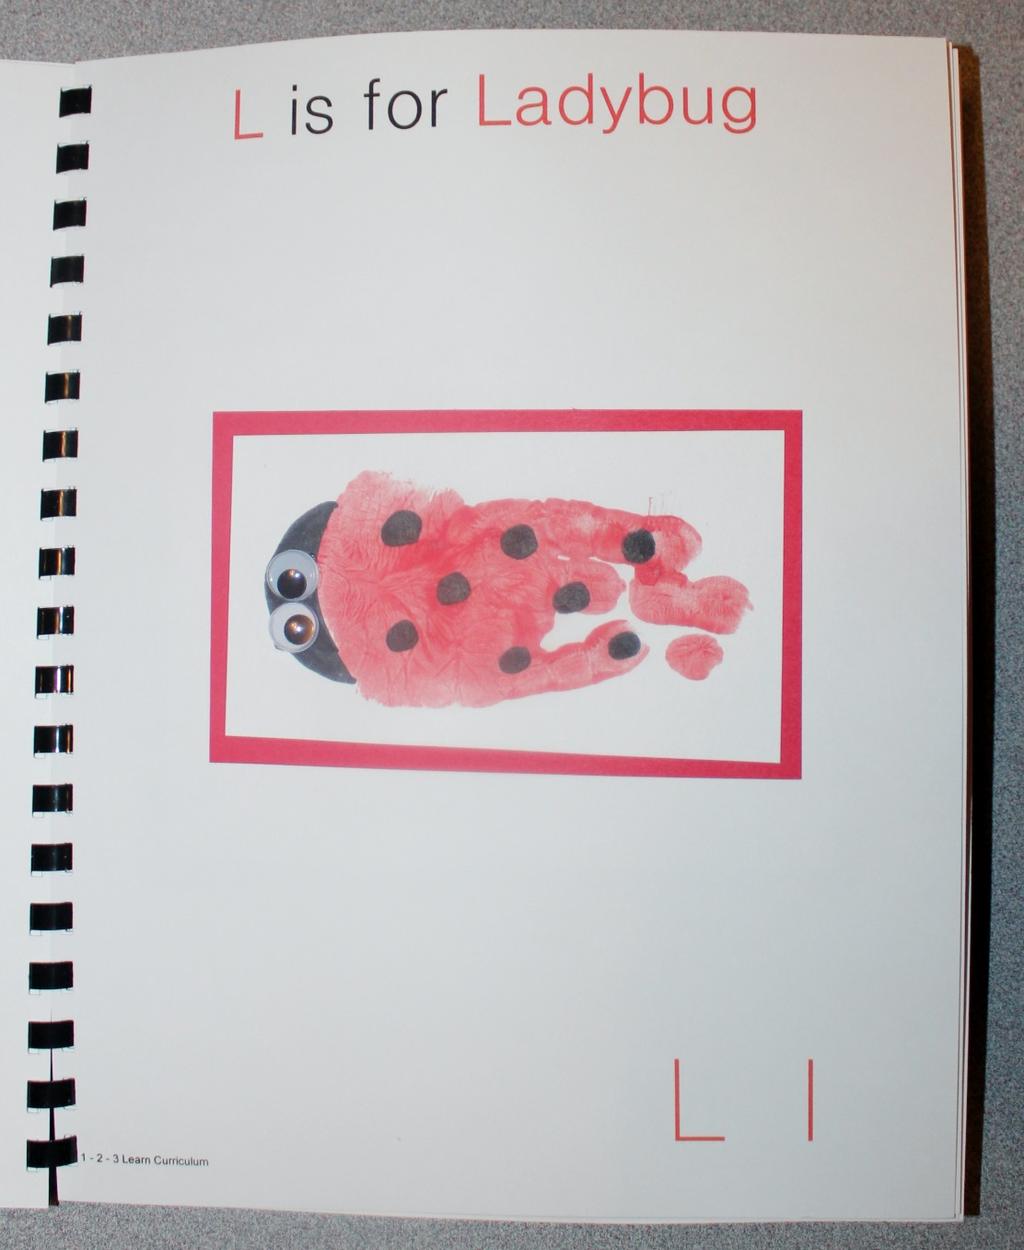 L is for Ladybug Paint the child s hand red, minus the thumb and place on white card stock. (You will want to keep the fingers together when placing on the white card stock).